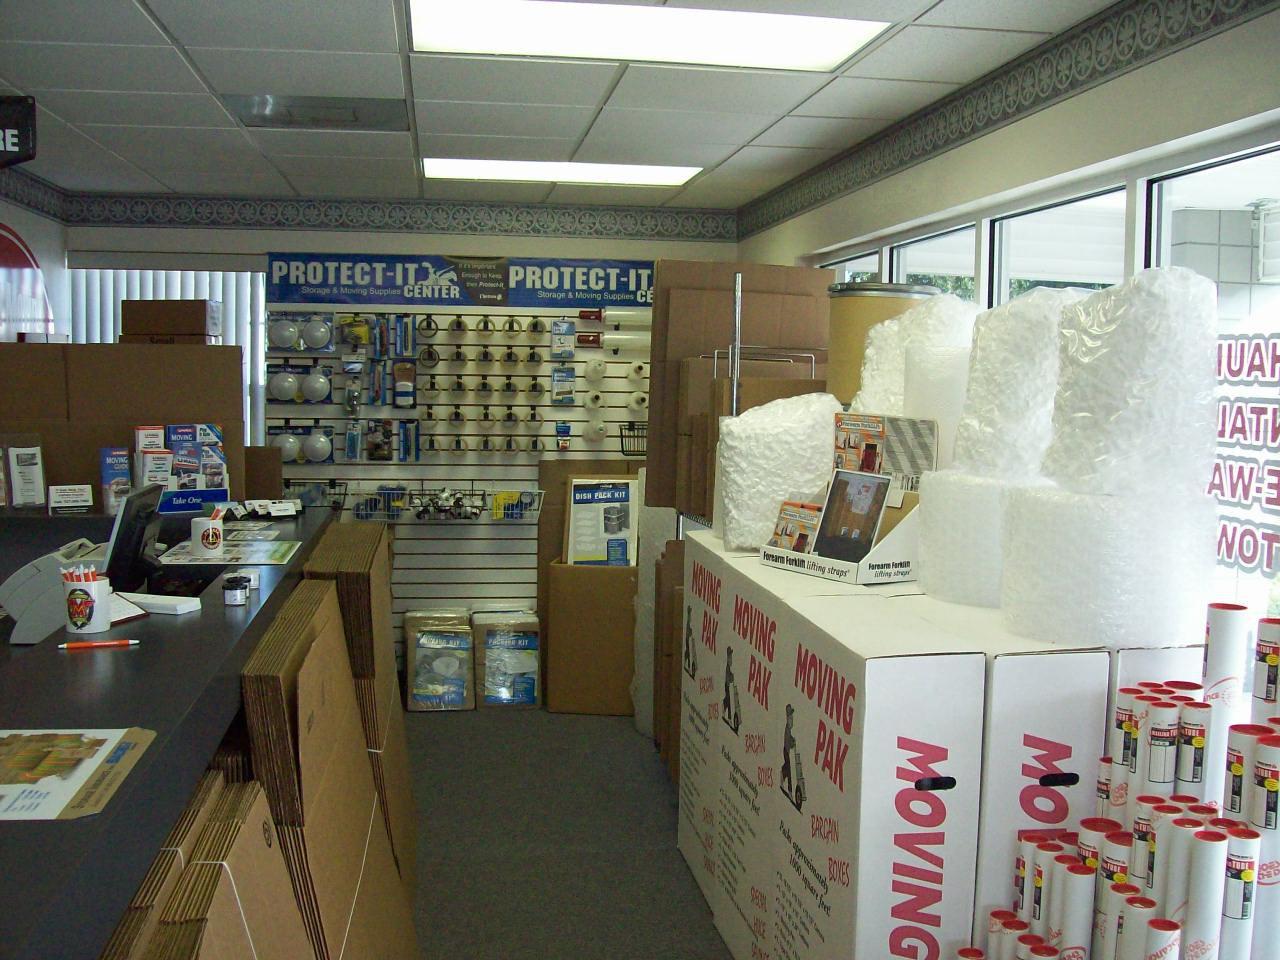 Packing & Moving Supplies The Storage Center New Port Richey (727)375-0742